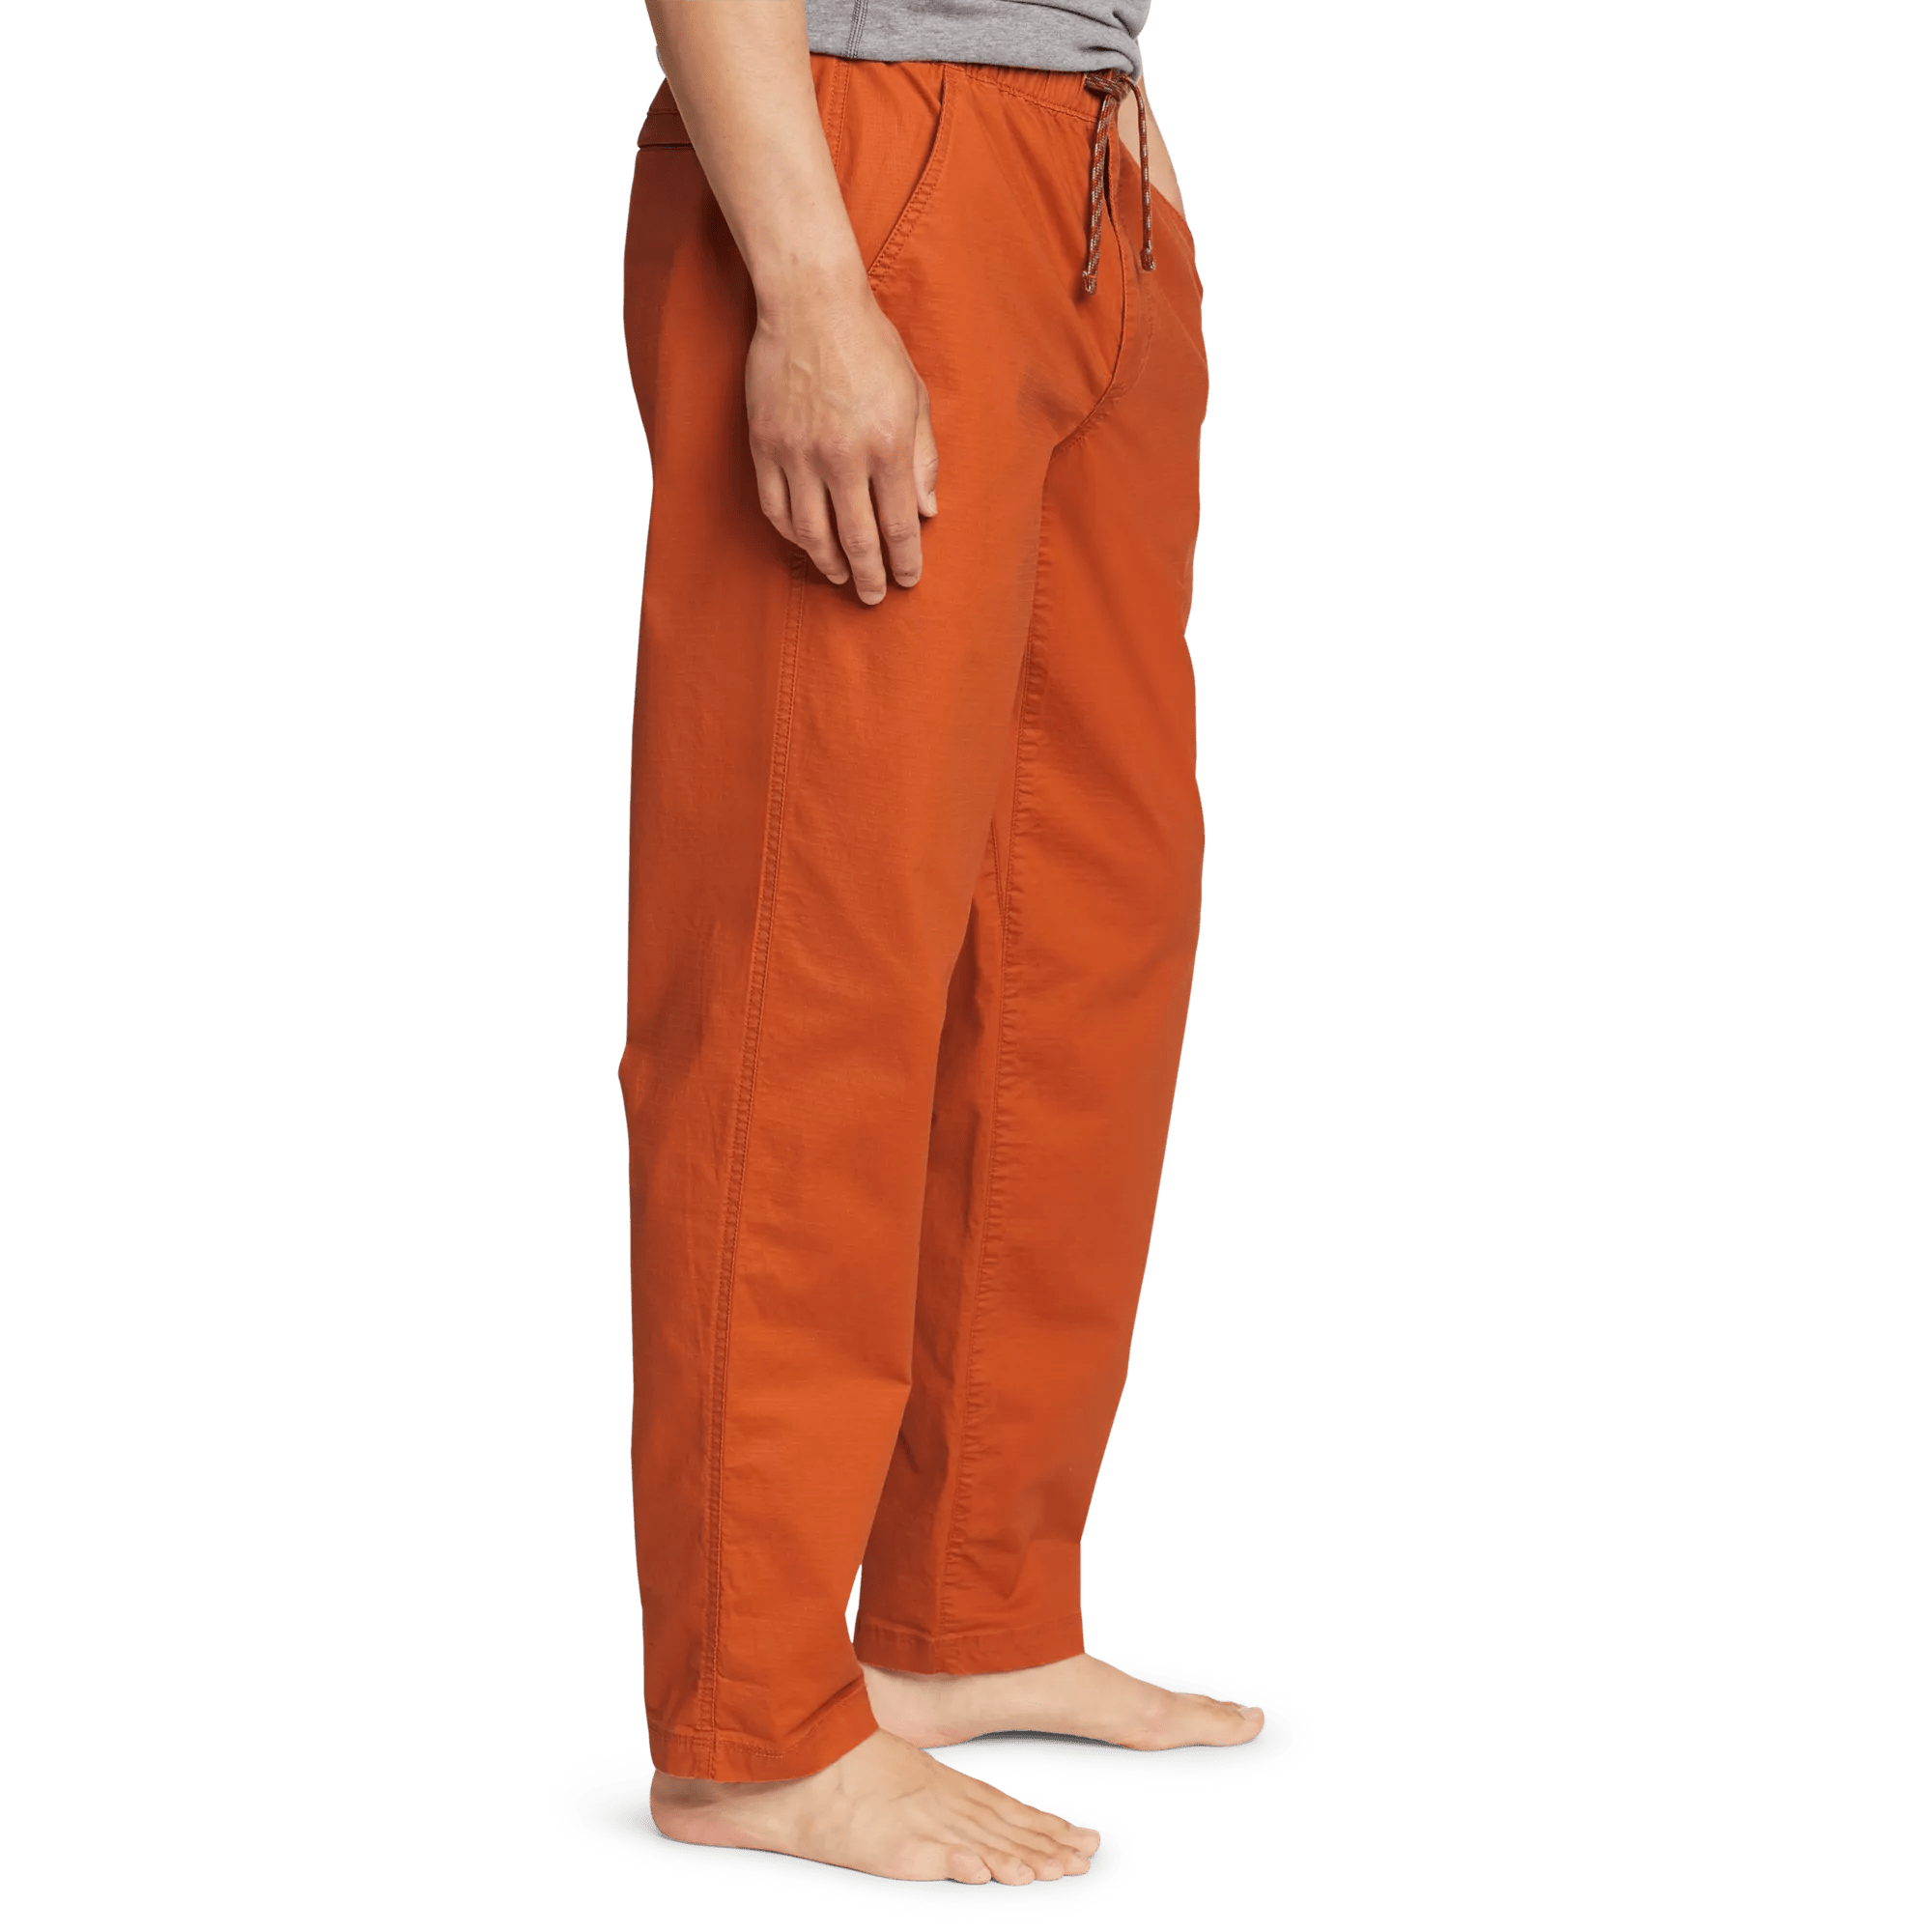 Top Out Ripstop Pants